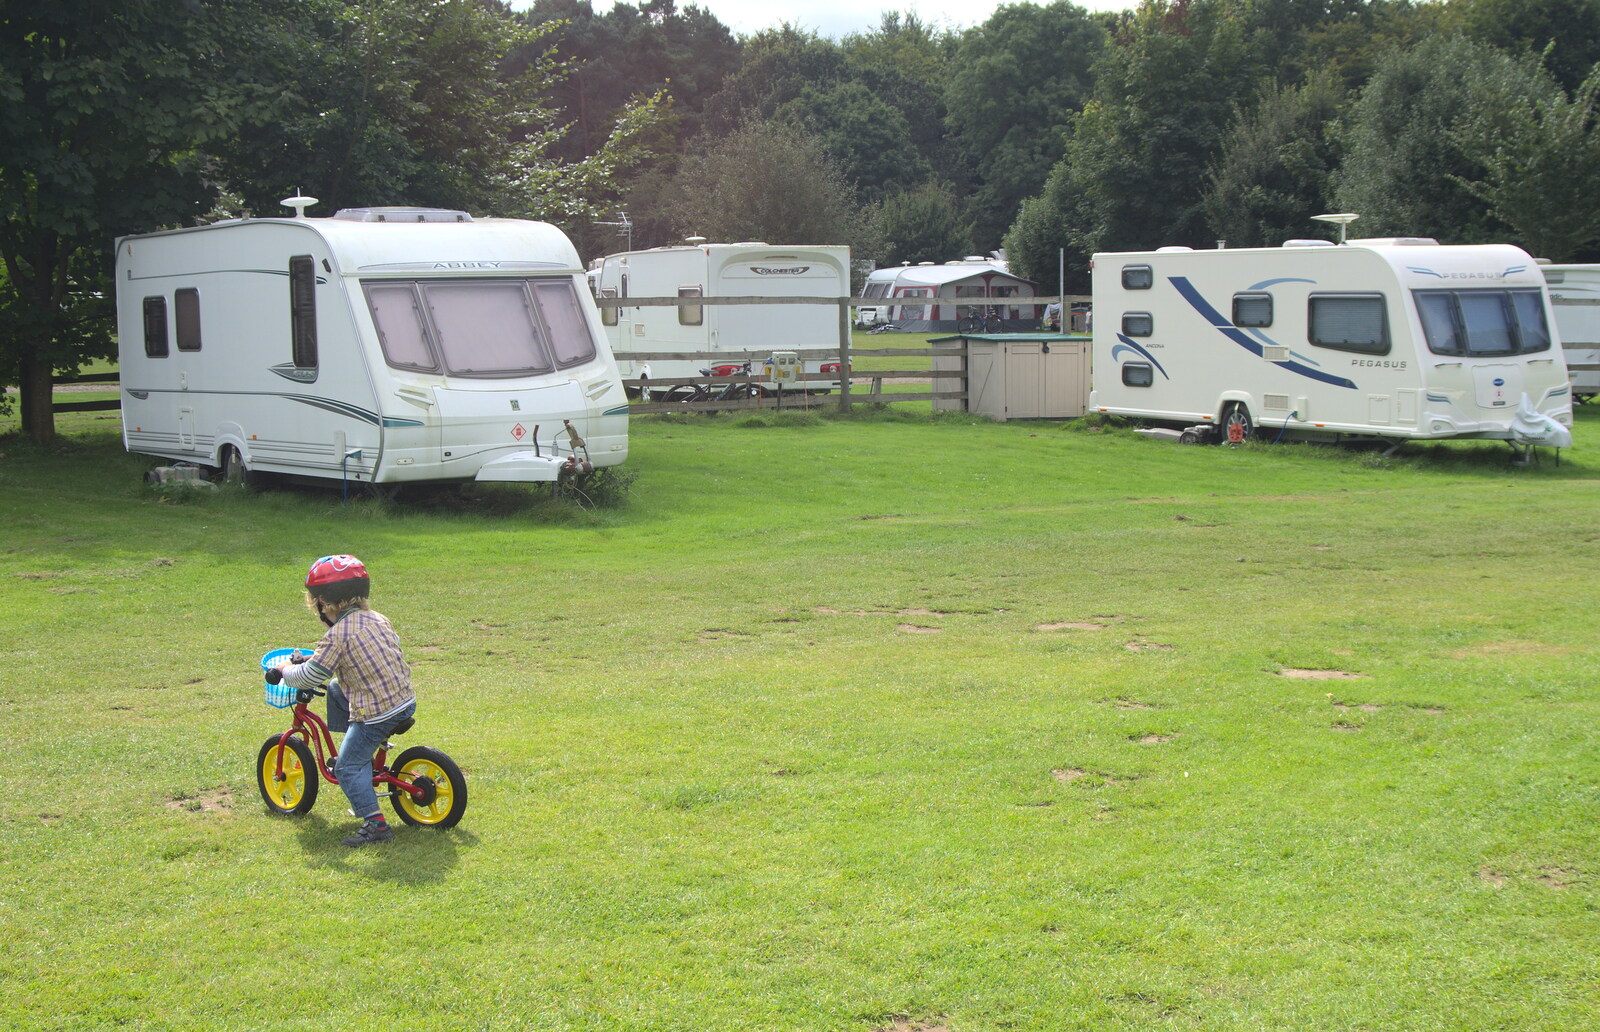 Fred scoots off on his balance bike from Camping at Dower House, West Harling, Norfolk - 1st September 2012